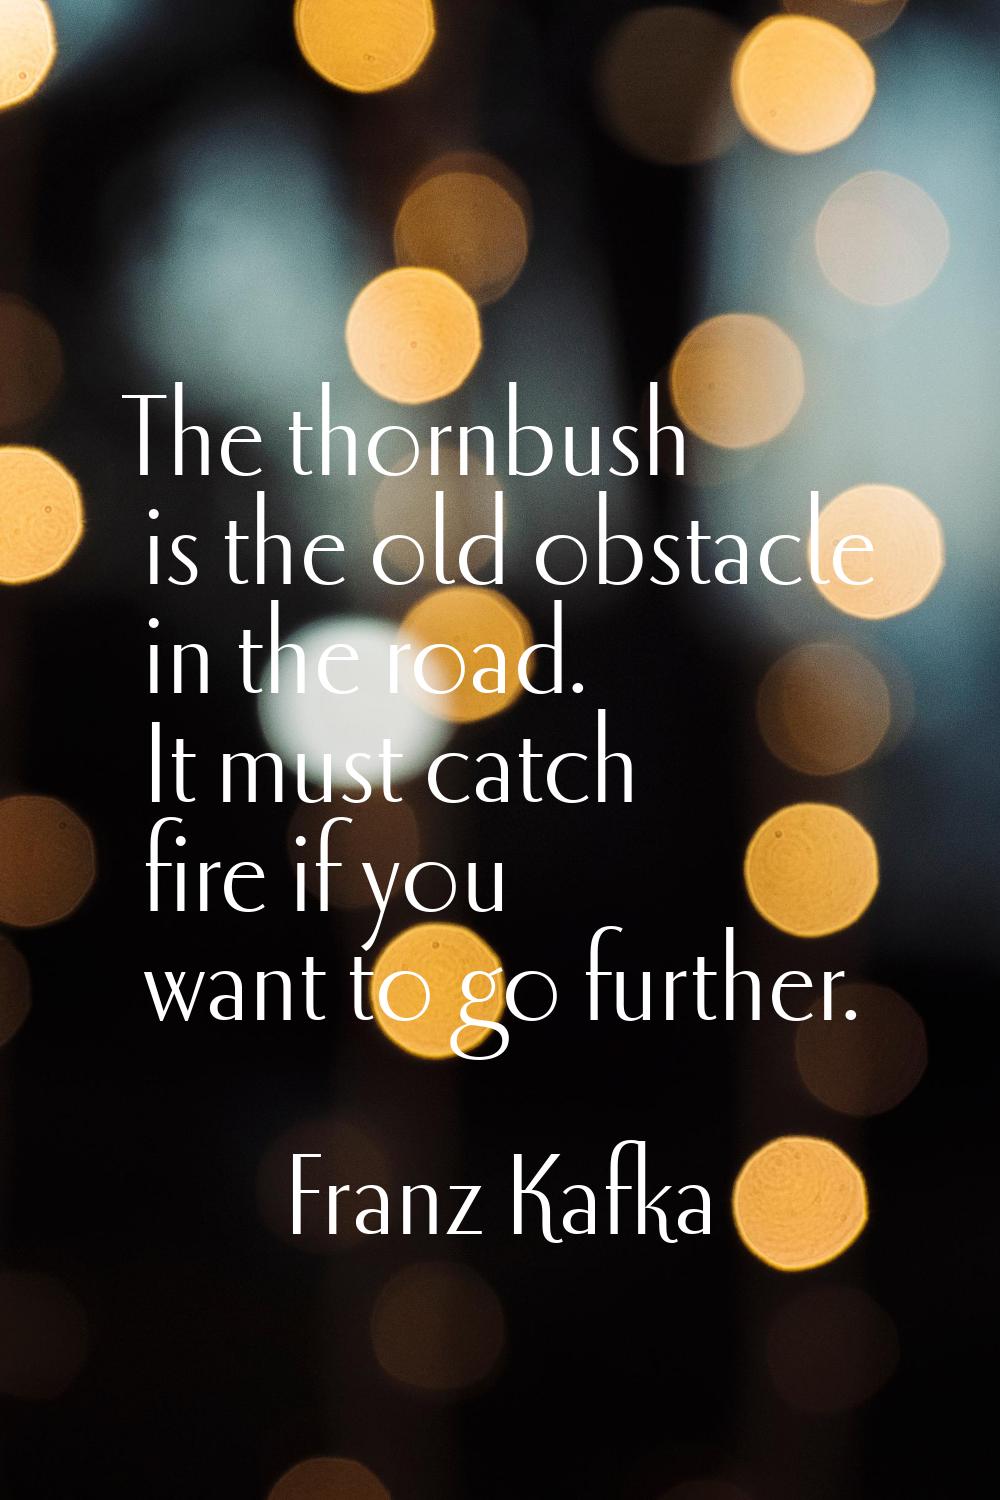 The thornbush is the old obstacle in the road. It must catch fire if you want to go further.